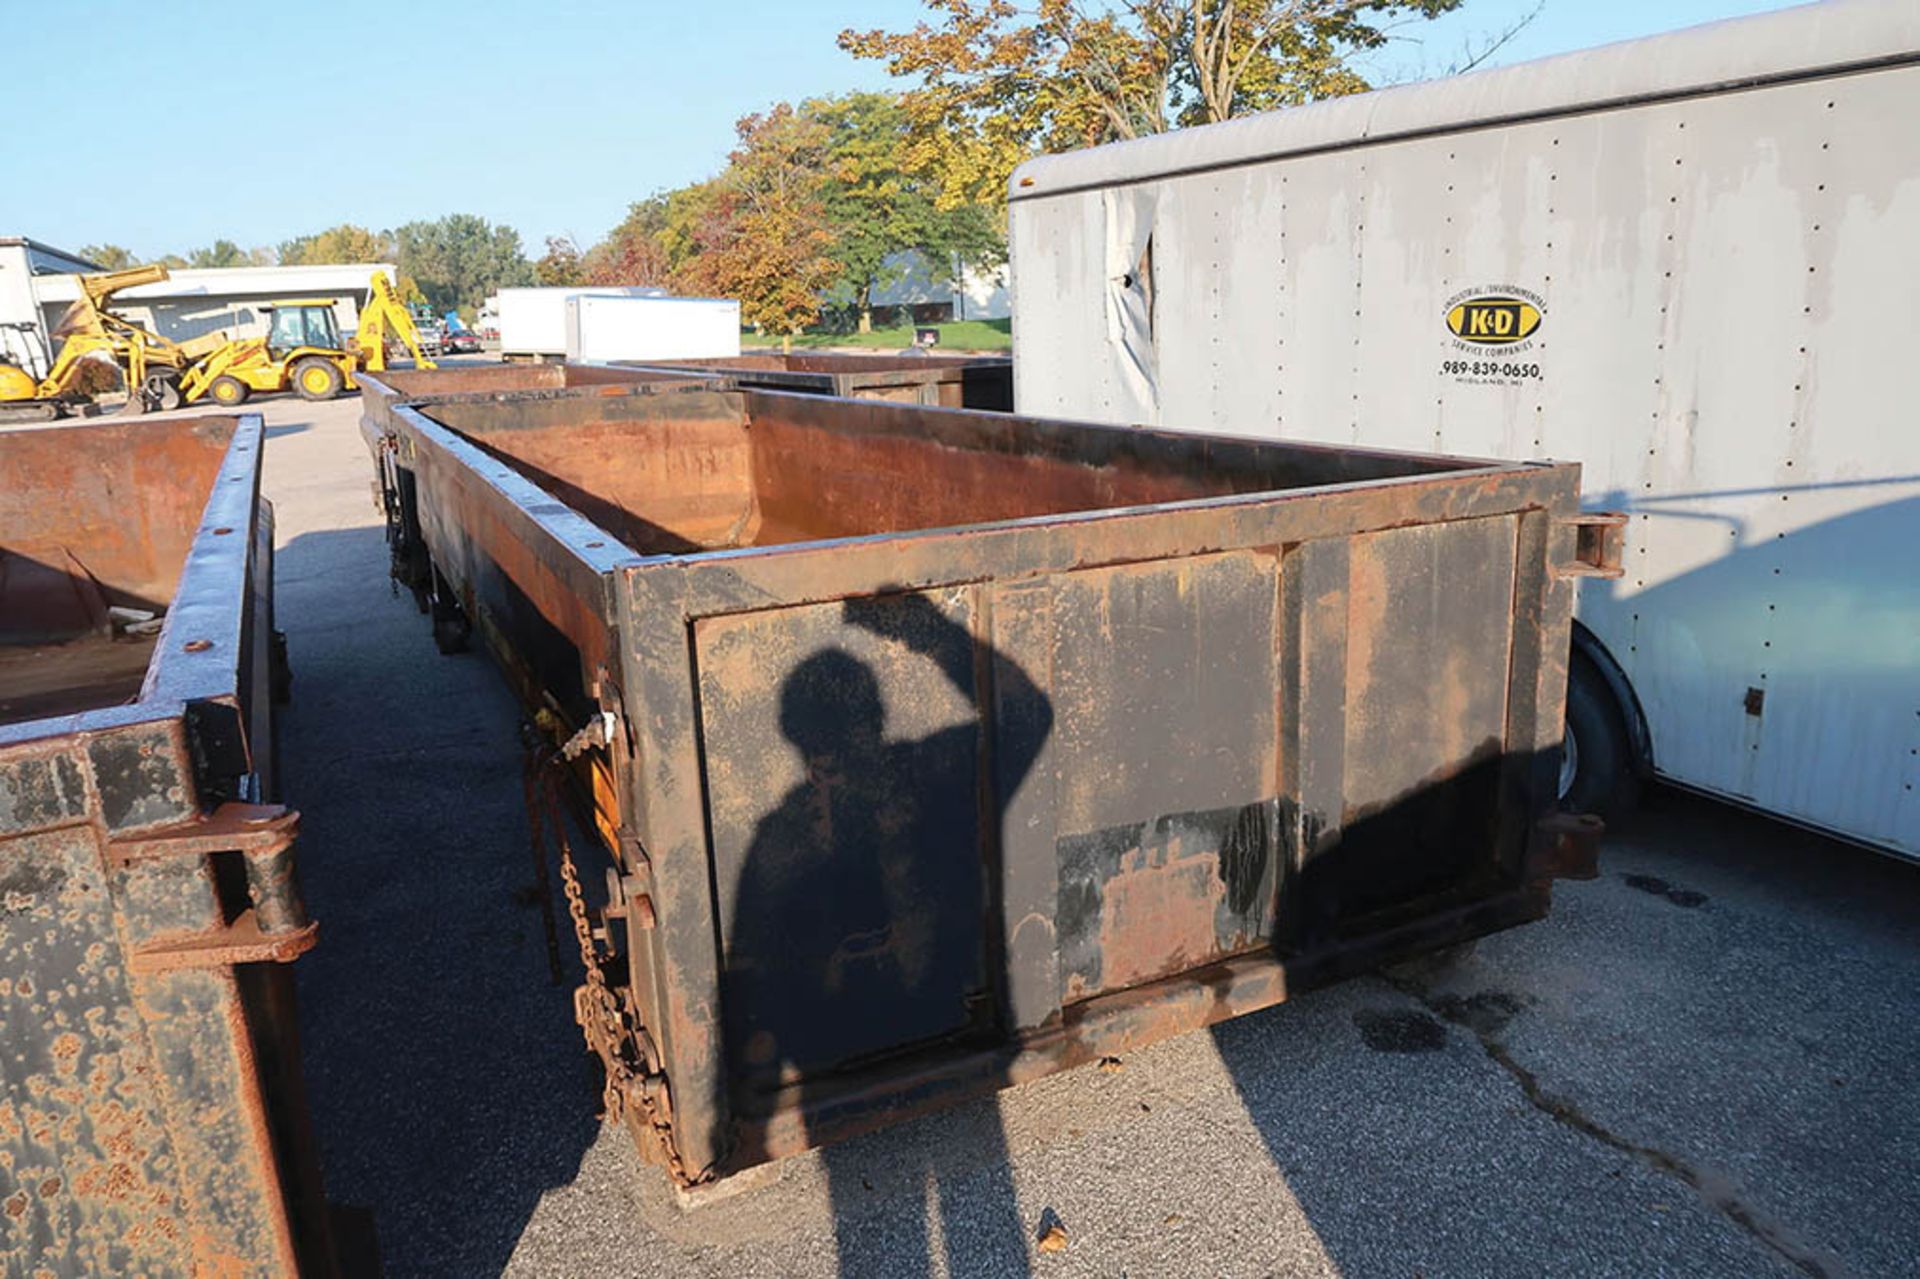 30 CU. YARD ROLL-OFF CONTAINER, RB91 ***LOCATED IN MIDLAND, MICHIGAN** - Image 2 of 3